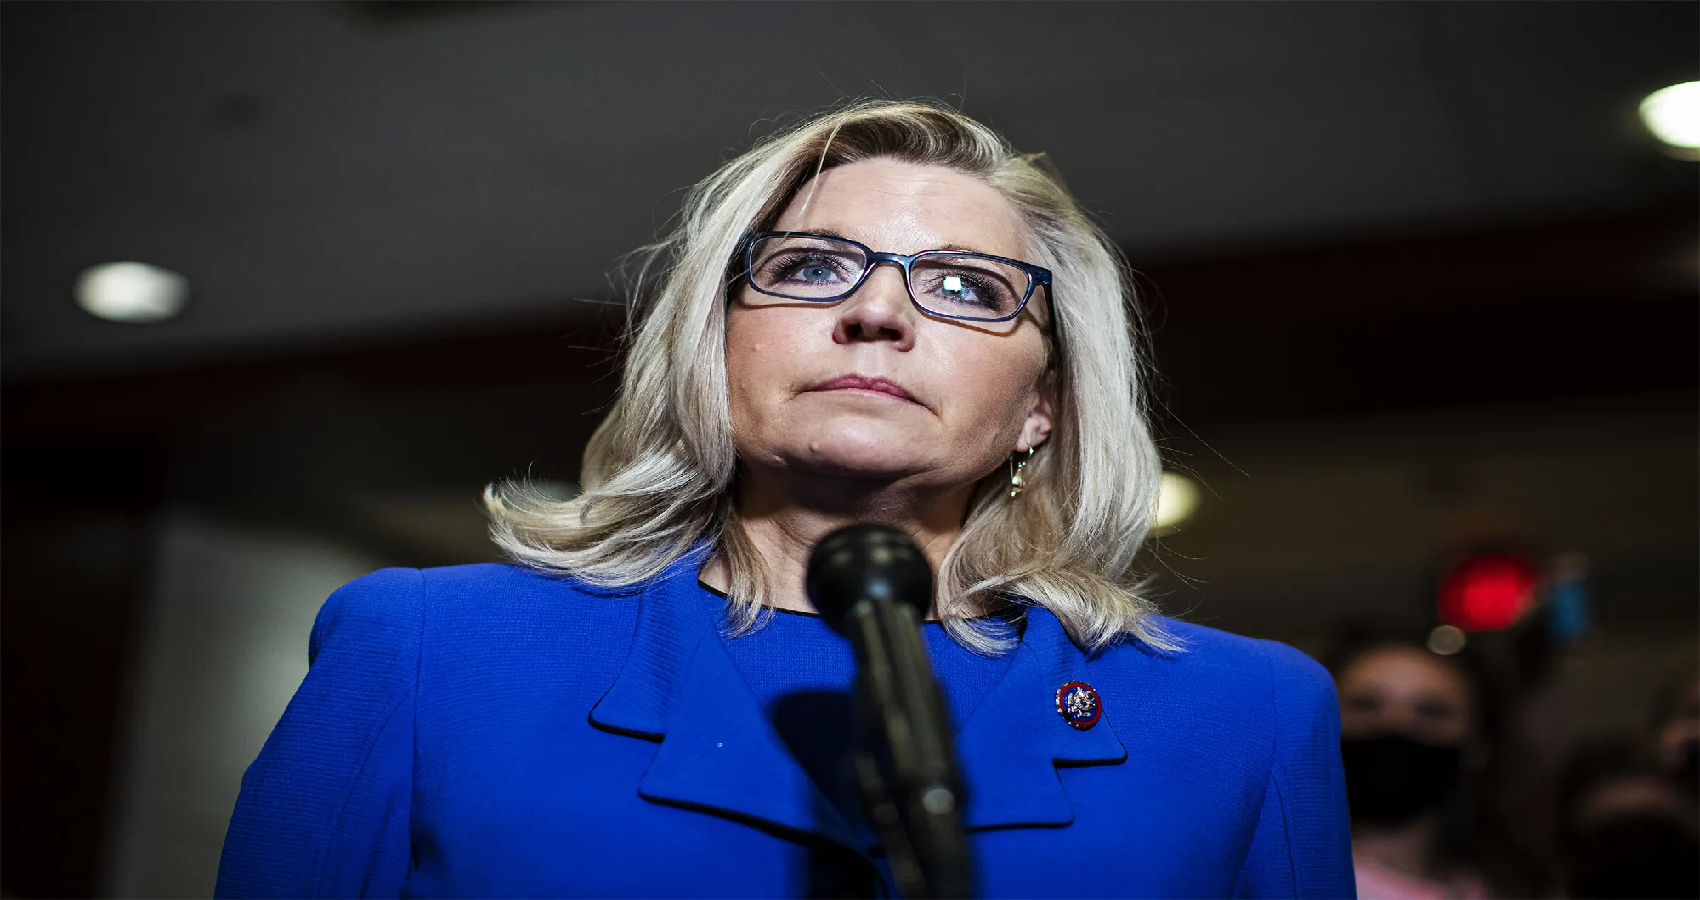 After Ouster, Liz Cheney Says She Will “Lead The Fight”